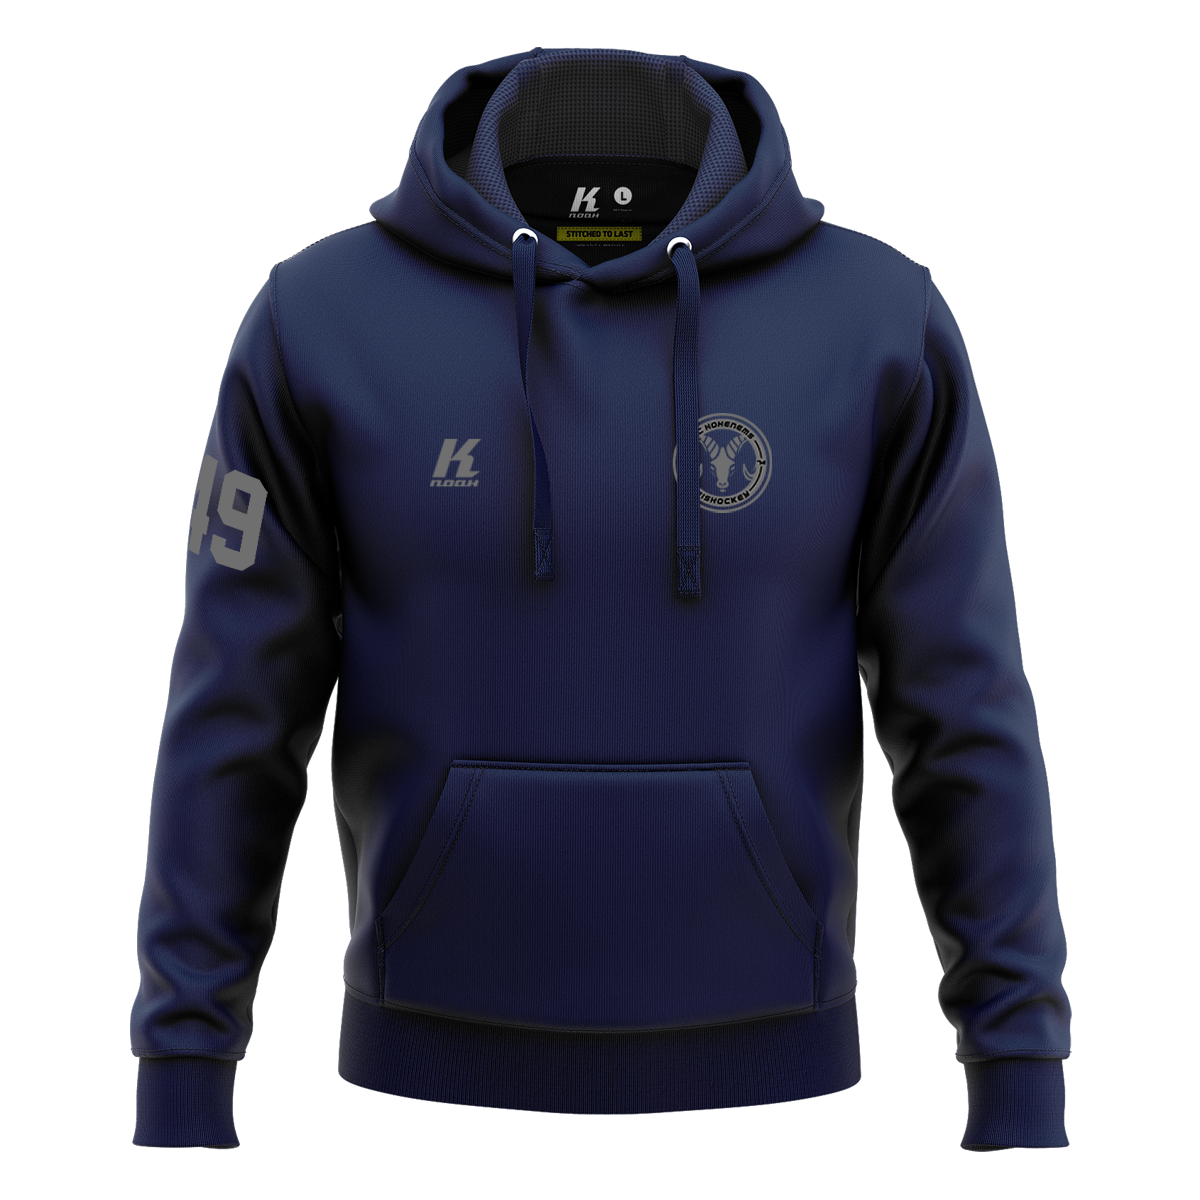 HSC Basic Hoodie Primary grey with Playernumber/Initials